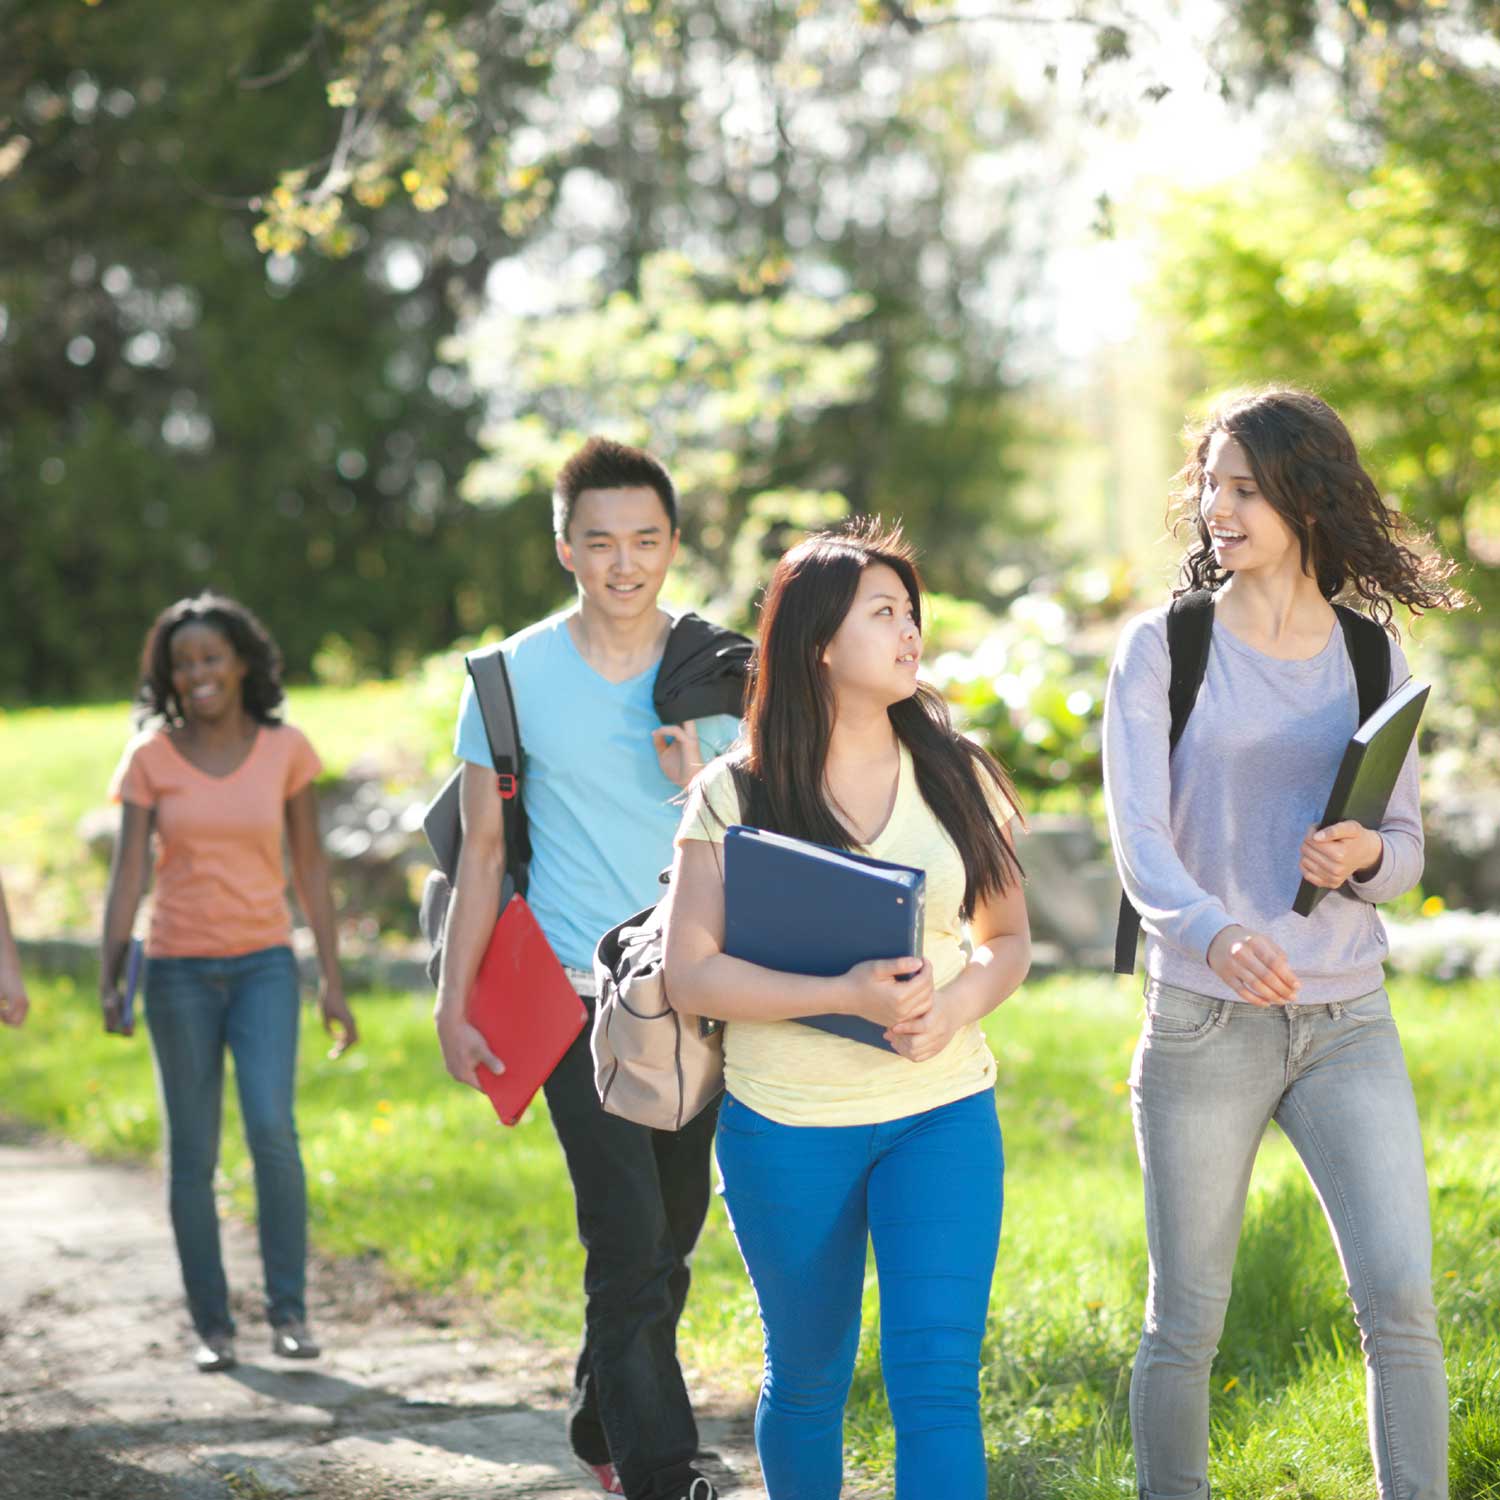 a group of students walk in a grassy area